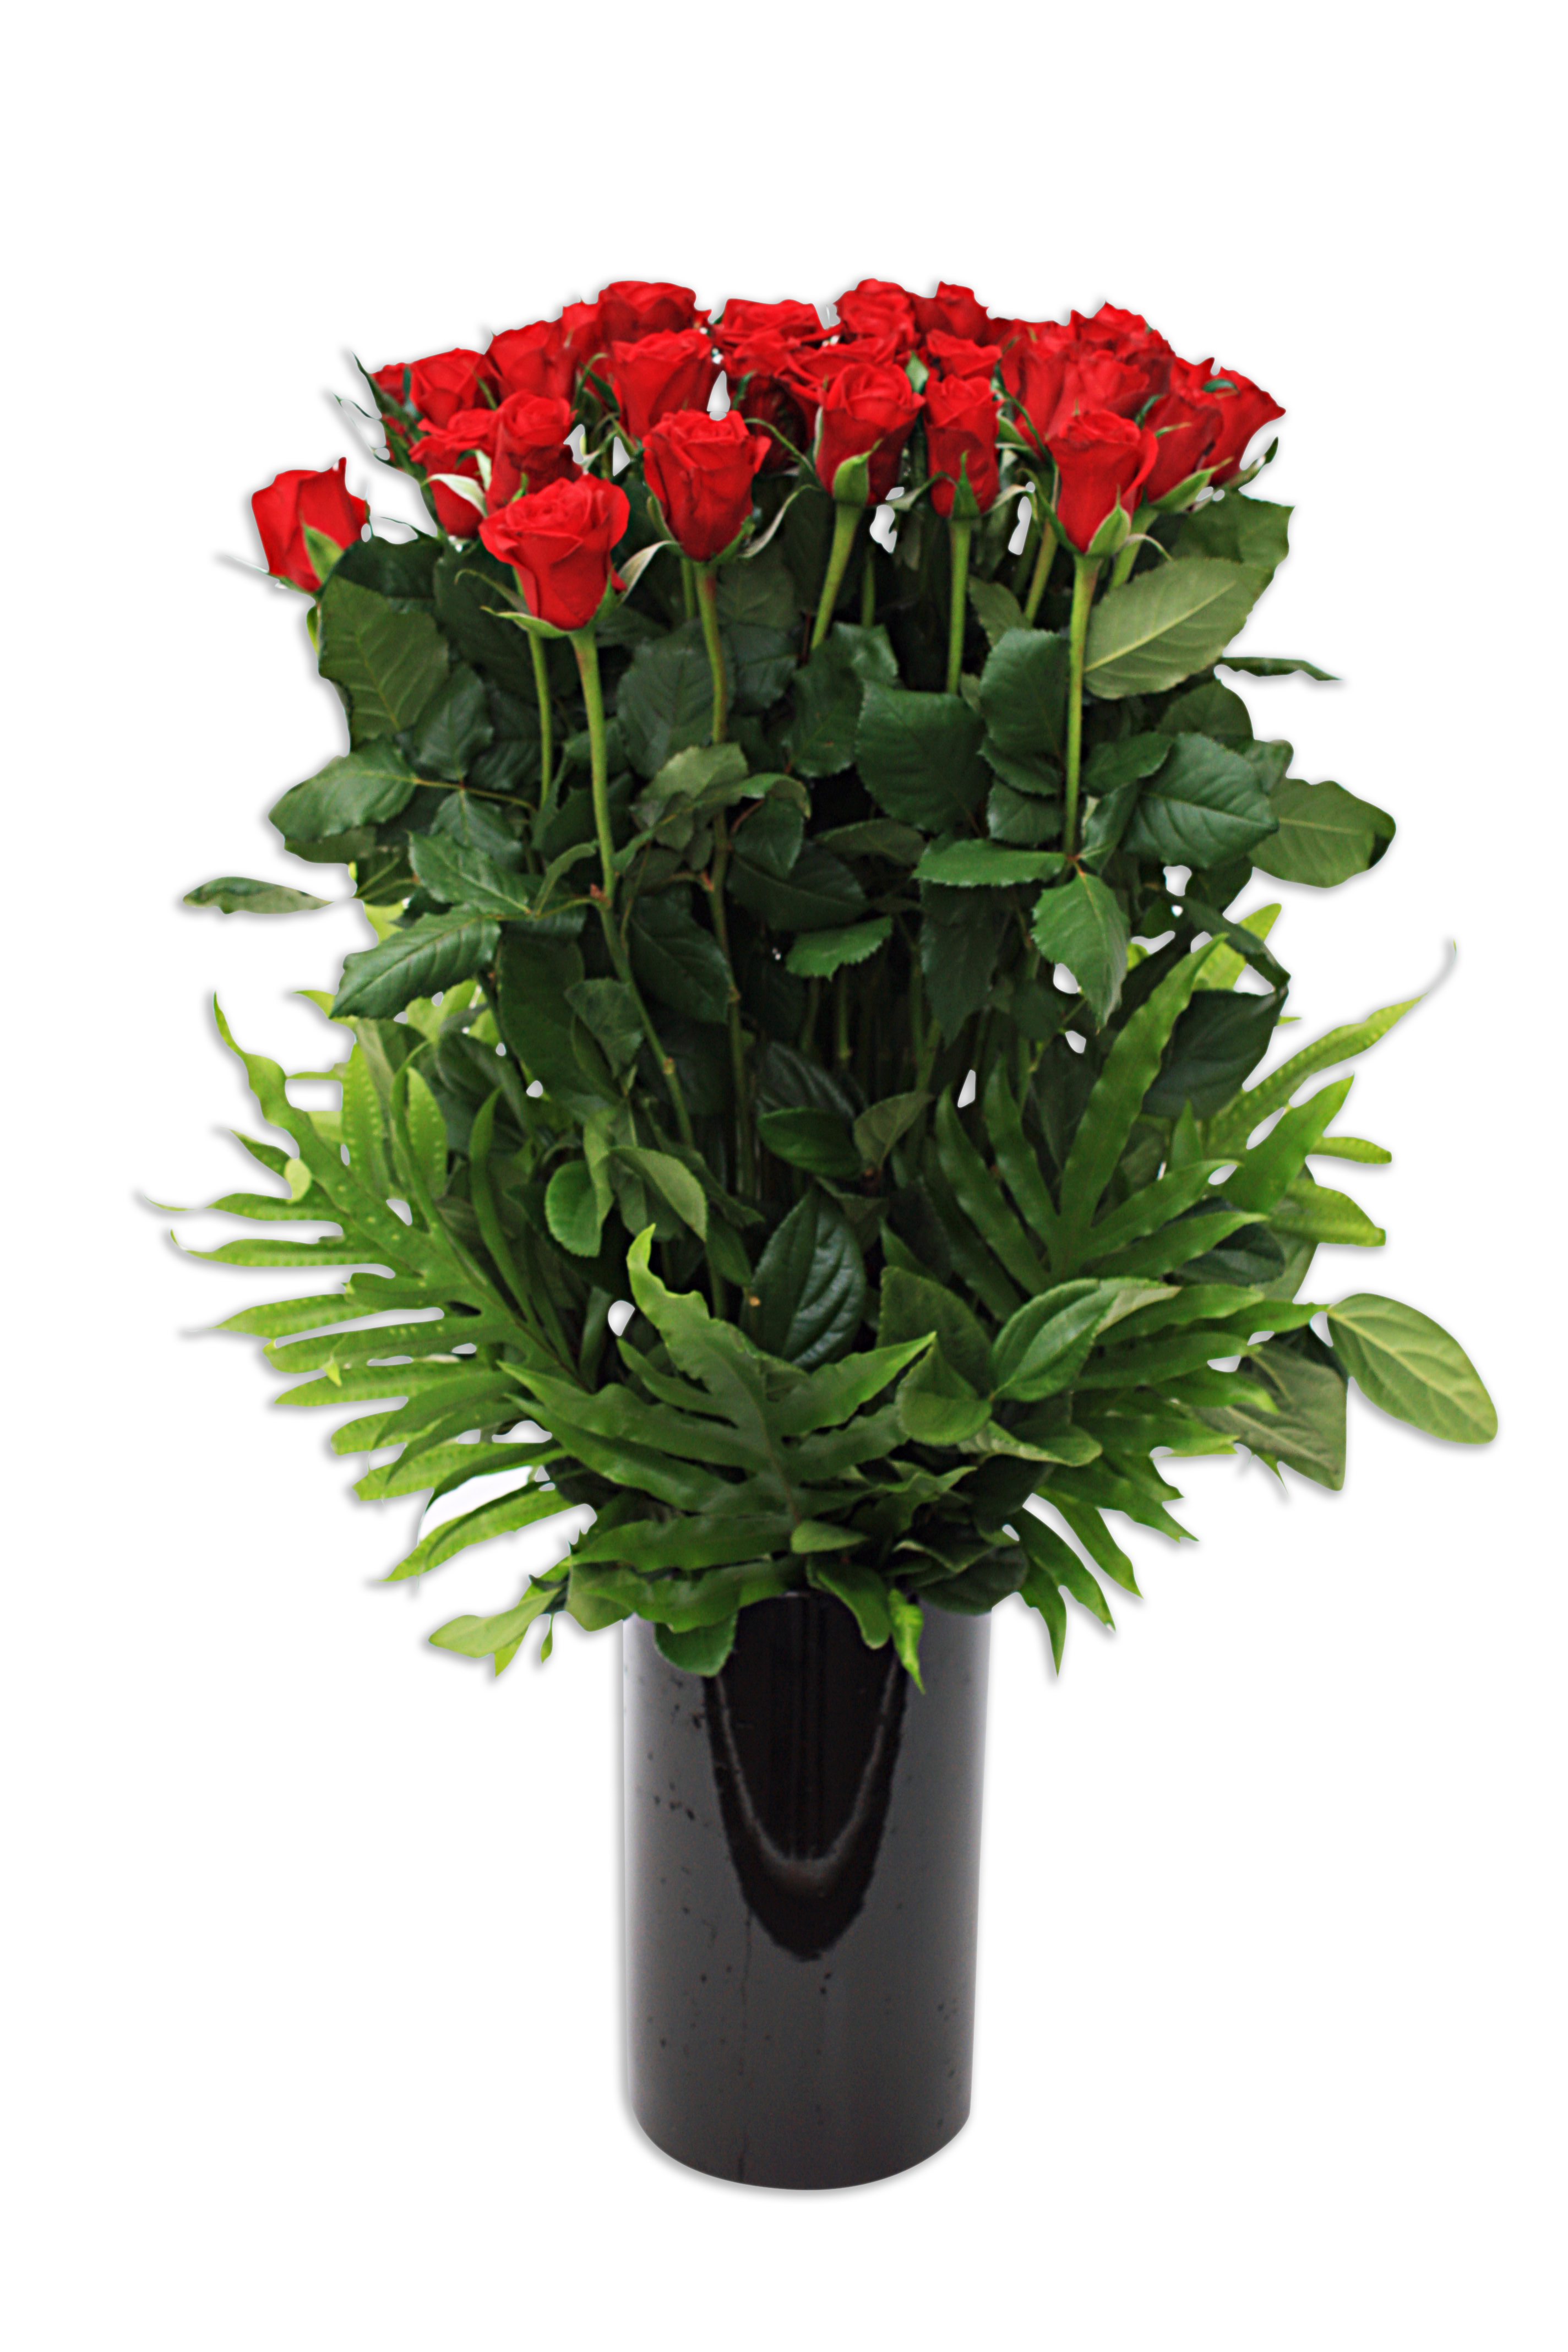 Wembley Day Surgery - Subiaco Florist Delivers Flowers & More to Wembley Day Surgery Daily